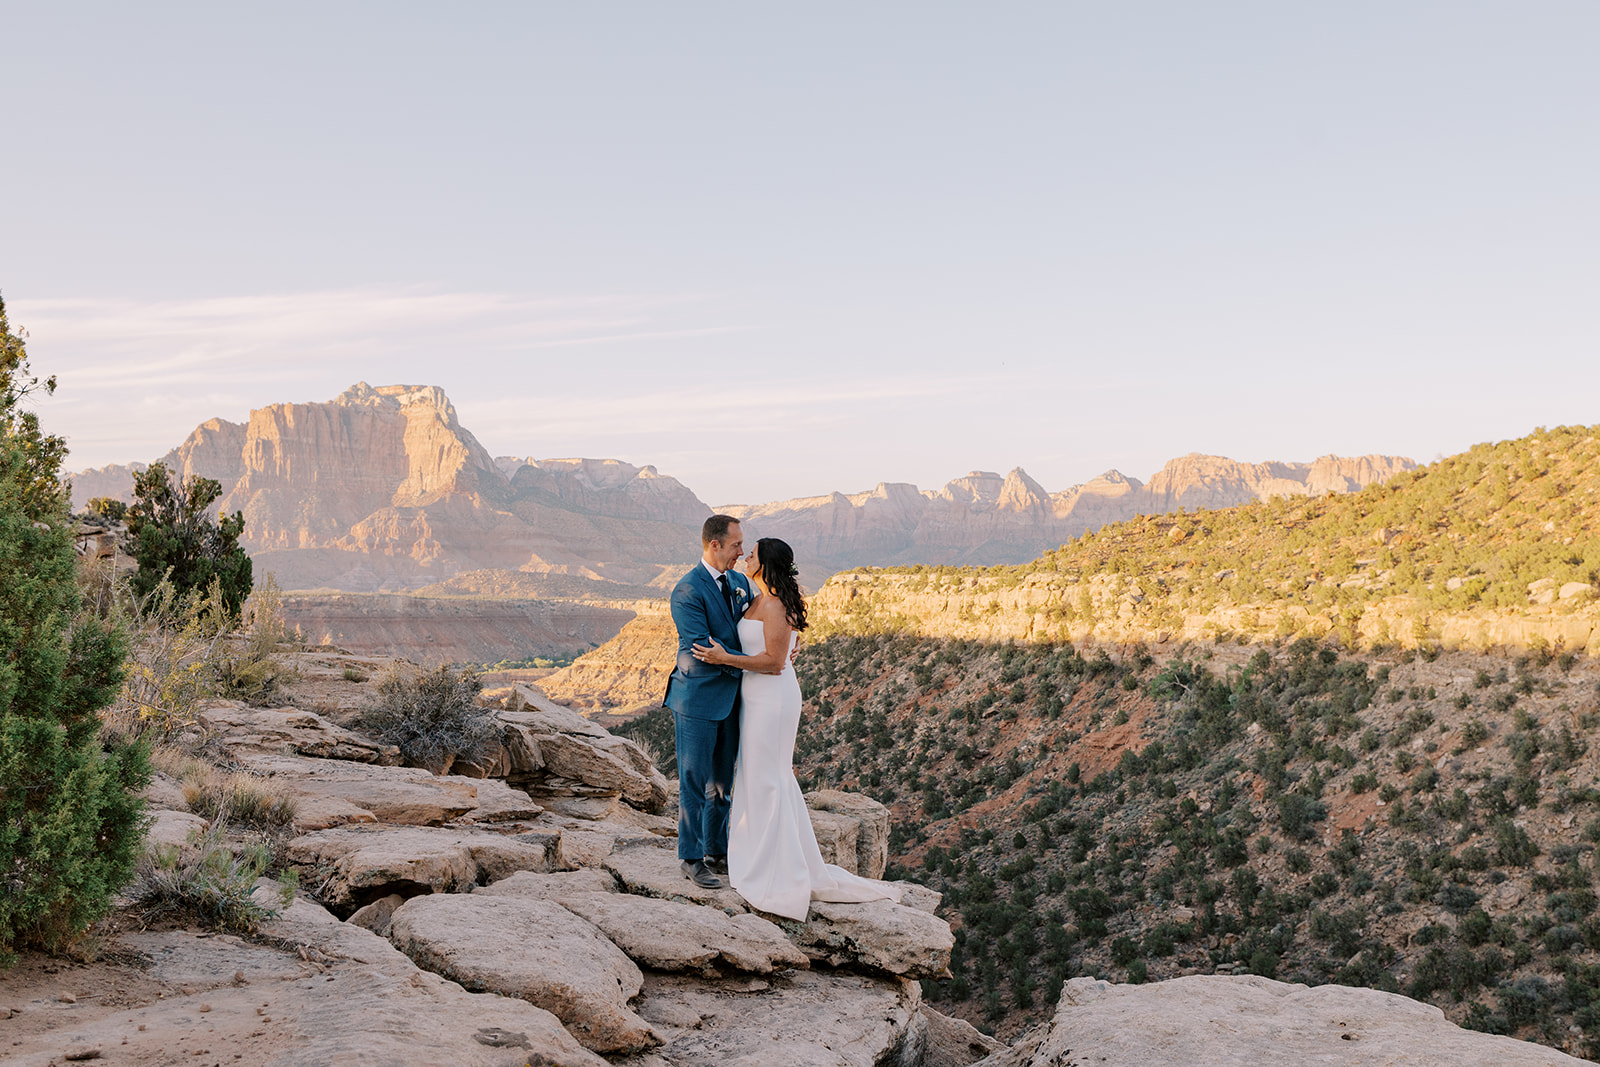 A couple who got married at sunset with Zion National Park in the background.